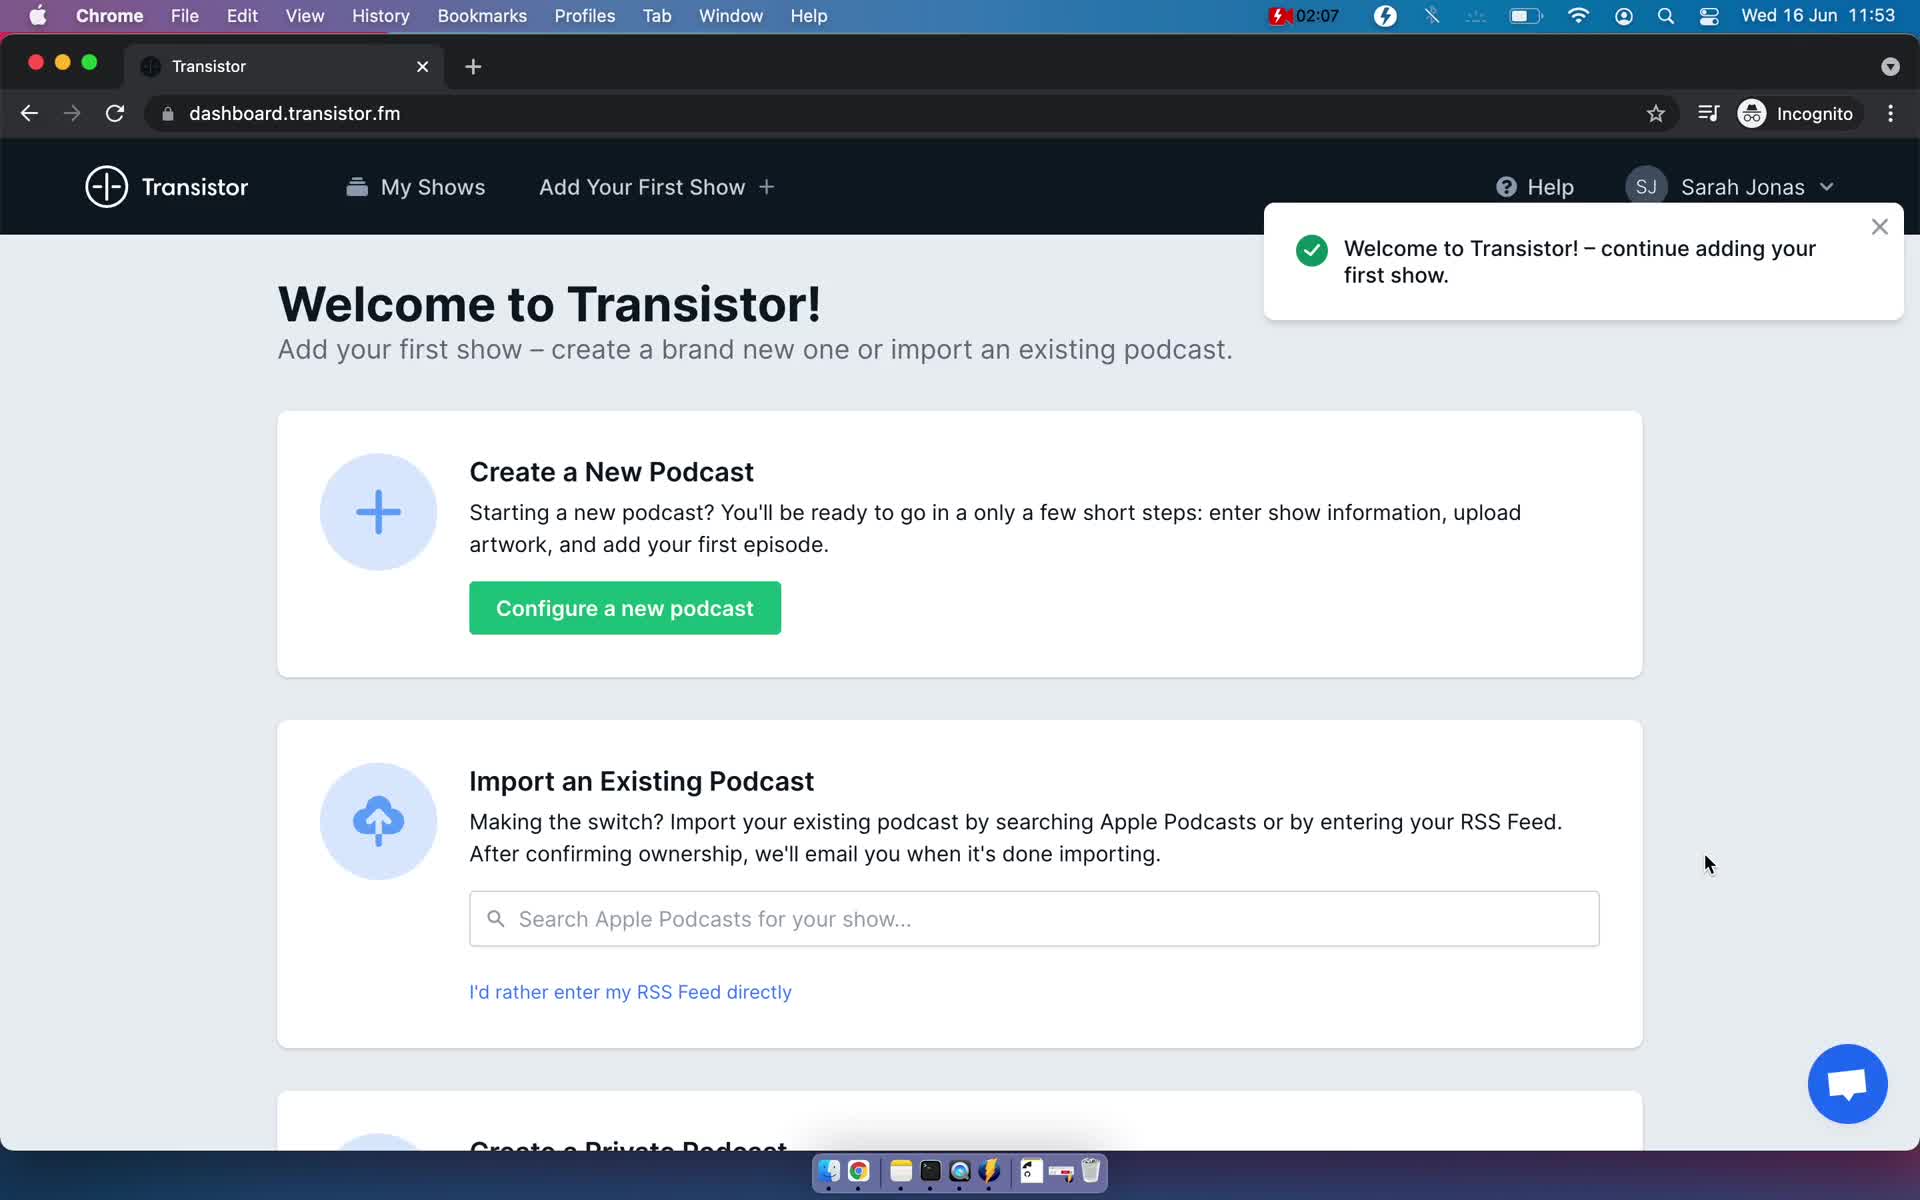 Screenshot of Welcome during Onboarding on Transistor user flow